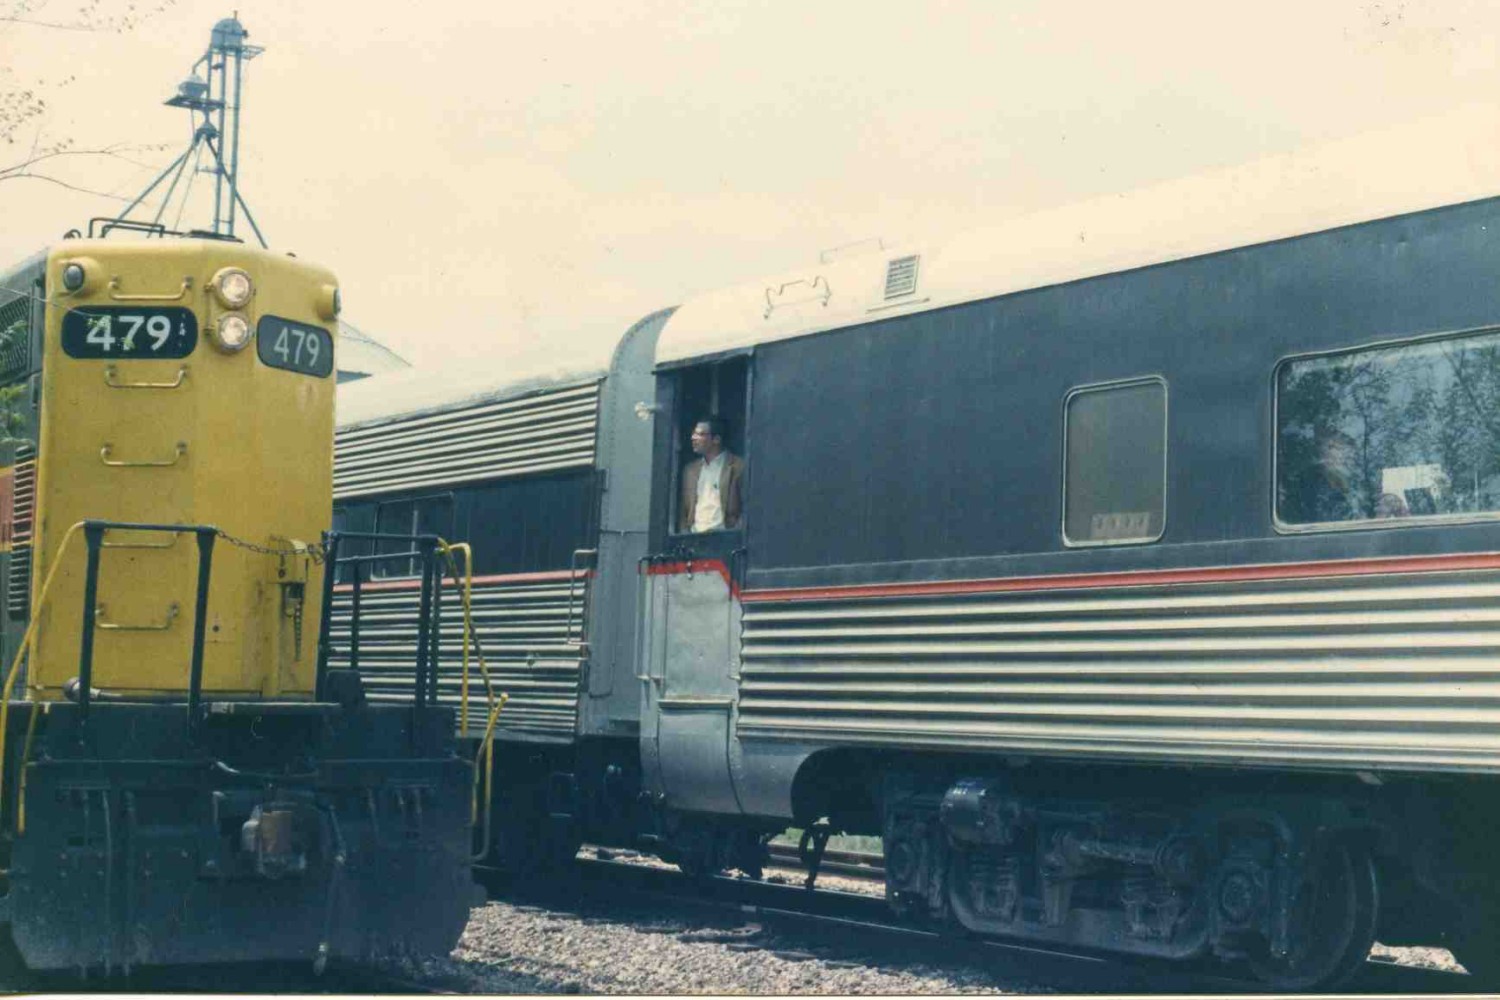 IAIS 479 with a Sunday run in May 1989